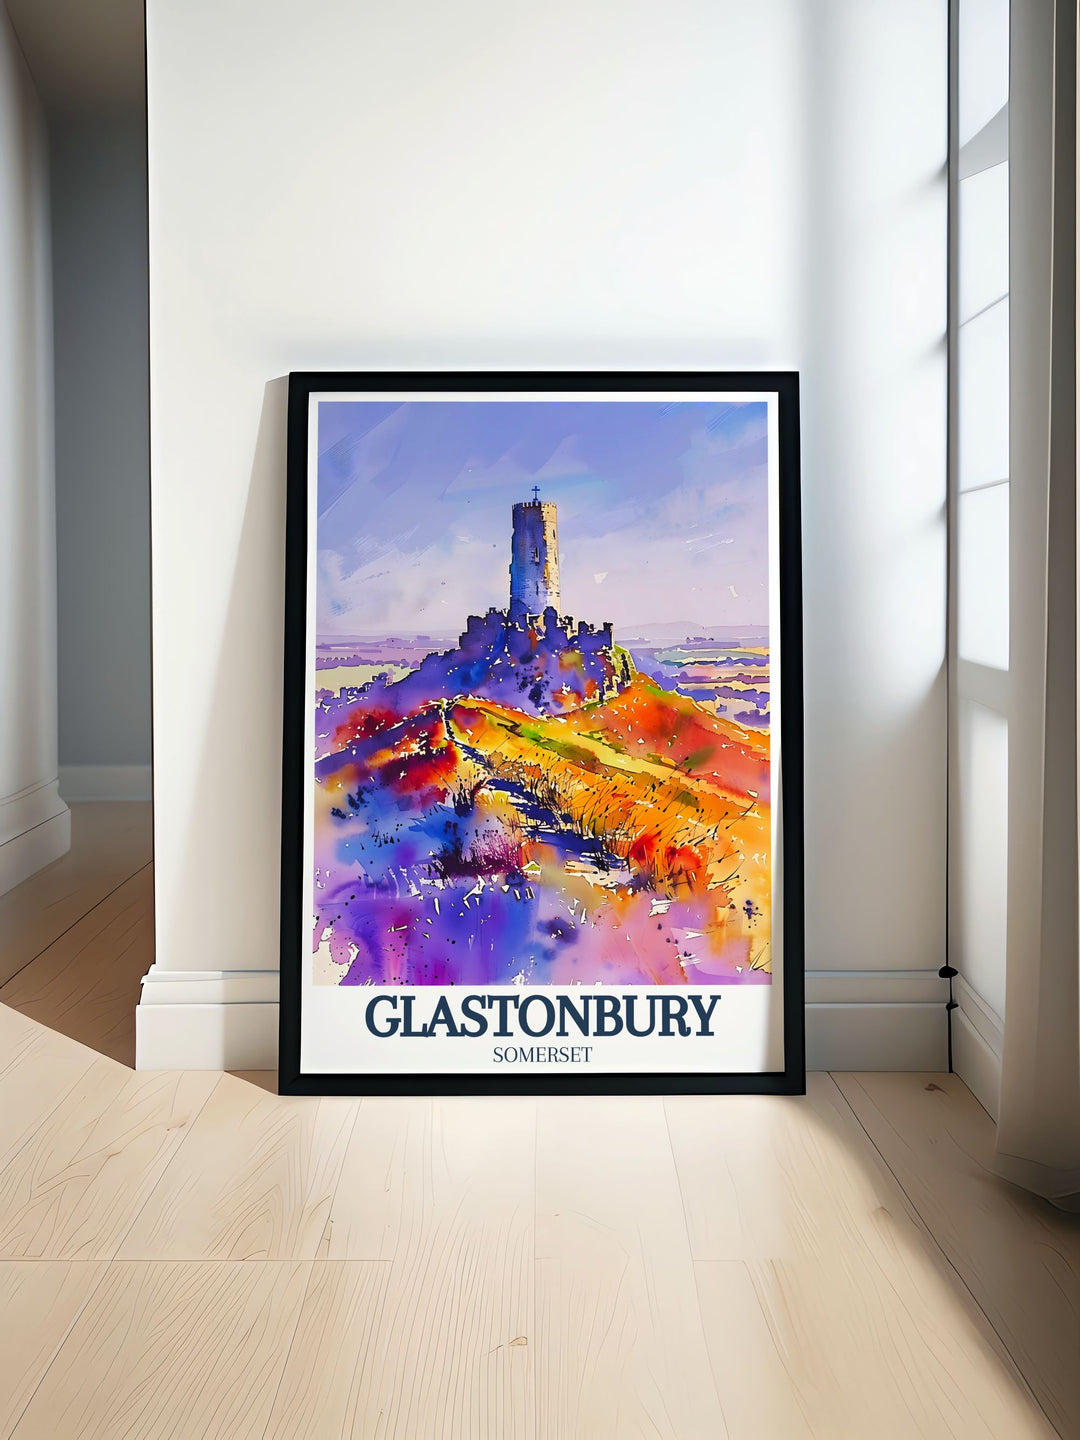 Stunning Glastonbury Tor art featuring St. Michaels tower and Somerset levels perfect for adding a touch of England wall art to your home ideal for UK art enthusiasts and those seeking unique Glastonbury gifts or England travel art for their decor.